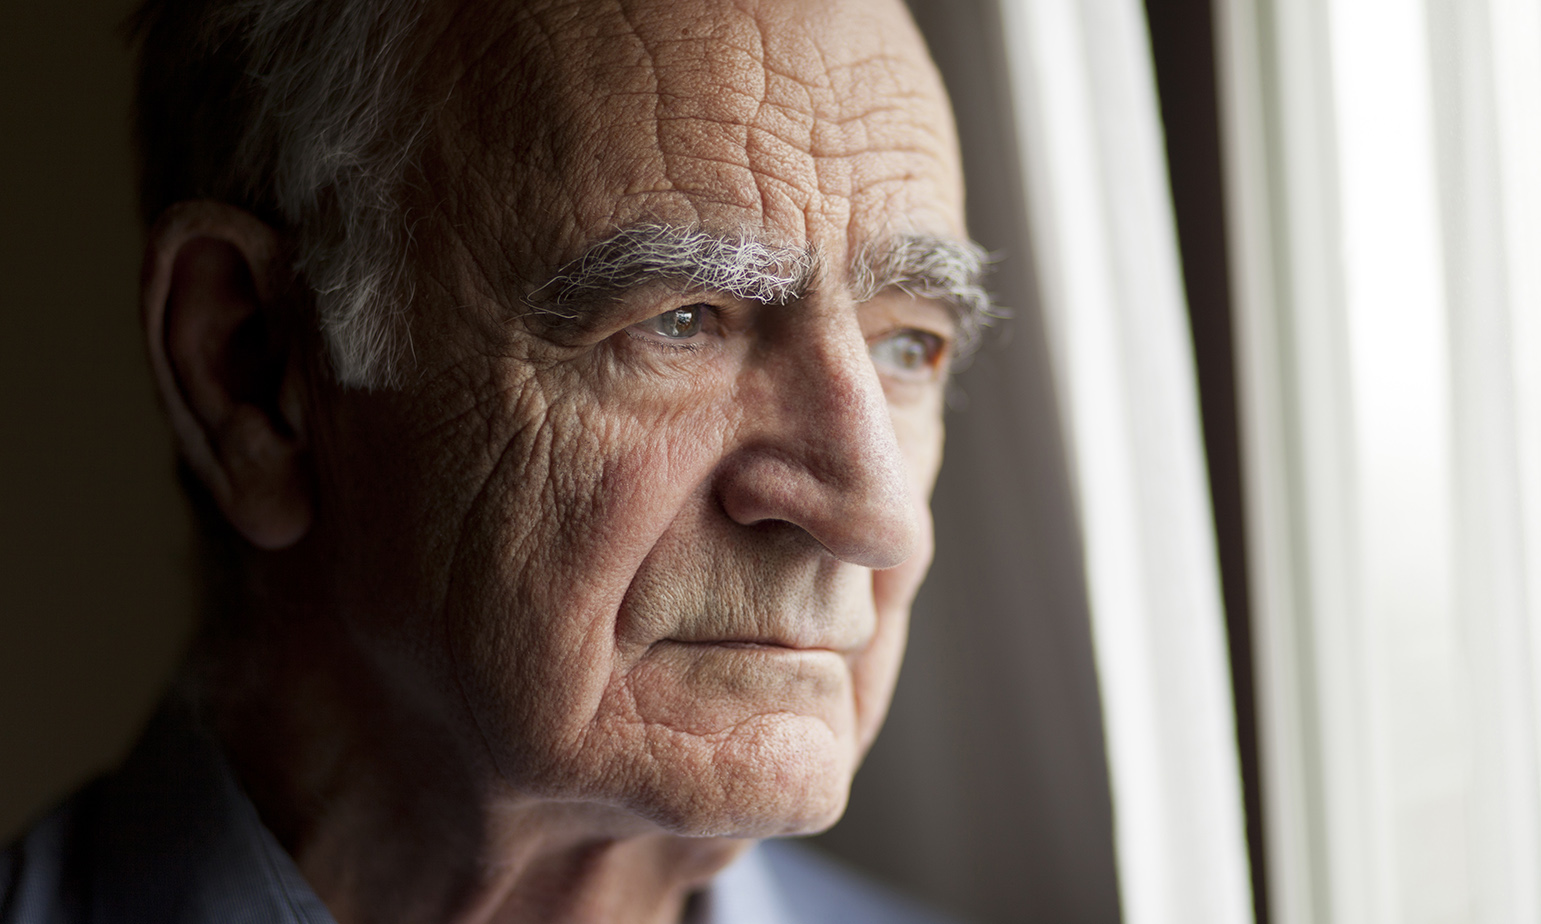 Elderly man gazing out window lost in thought